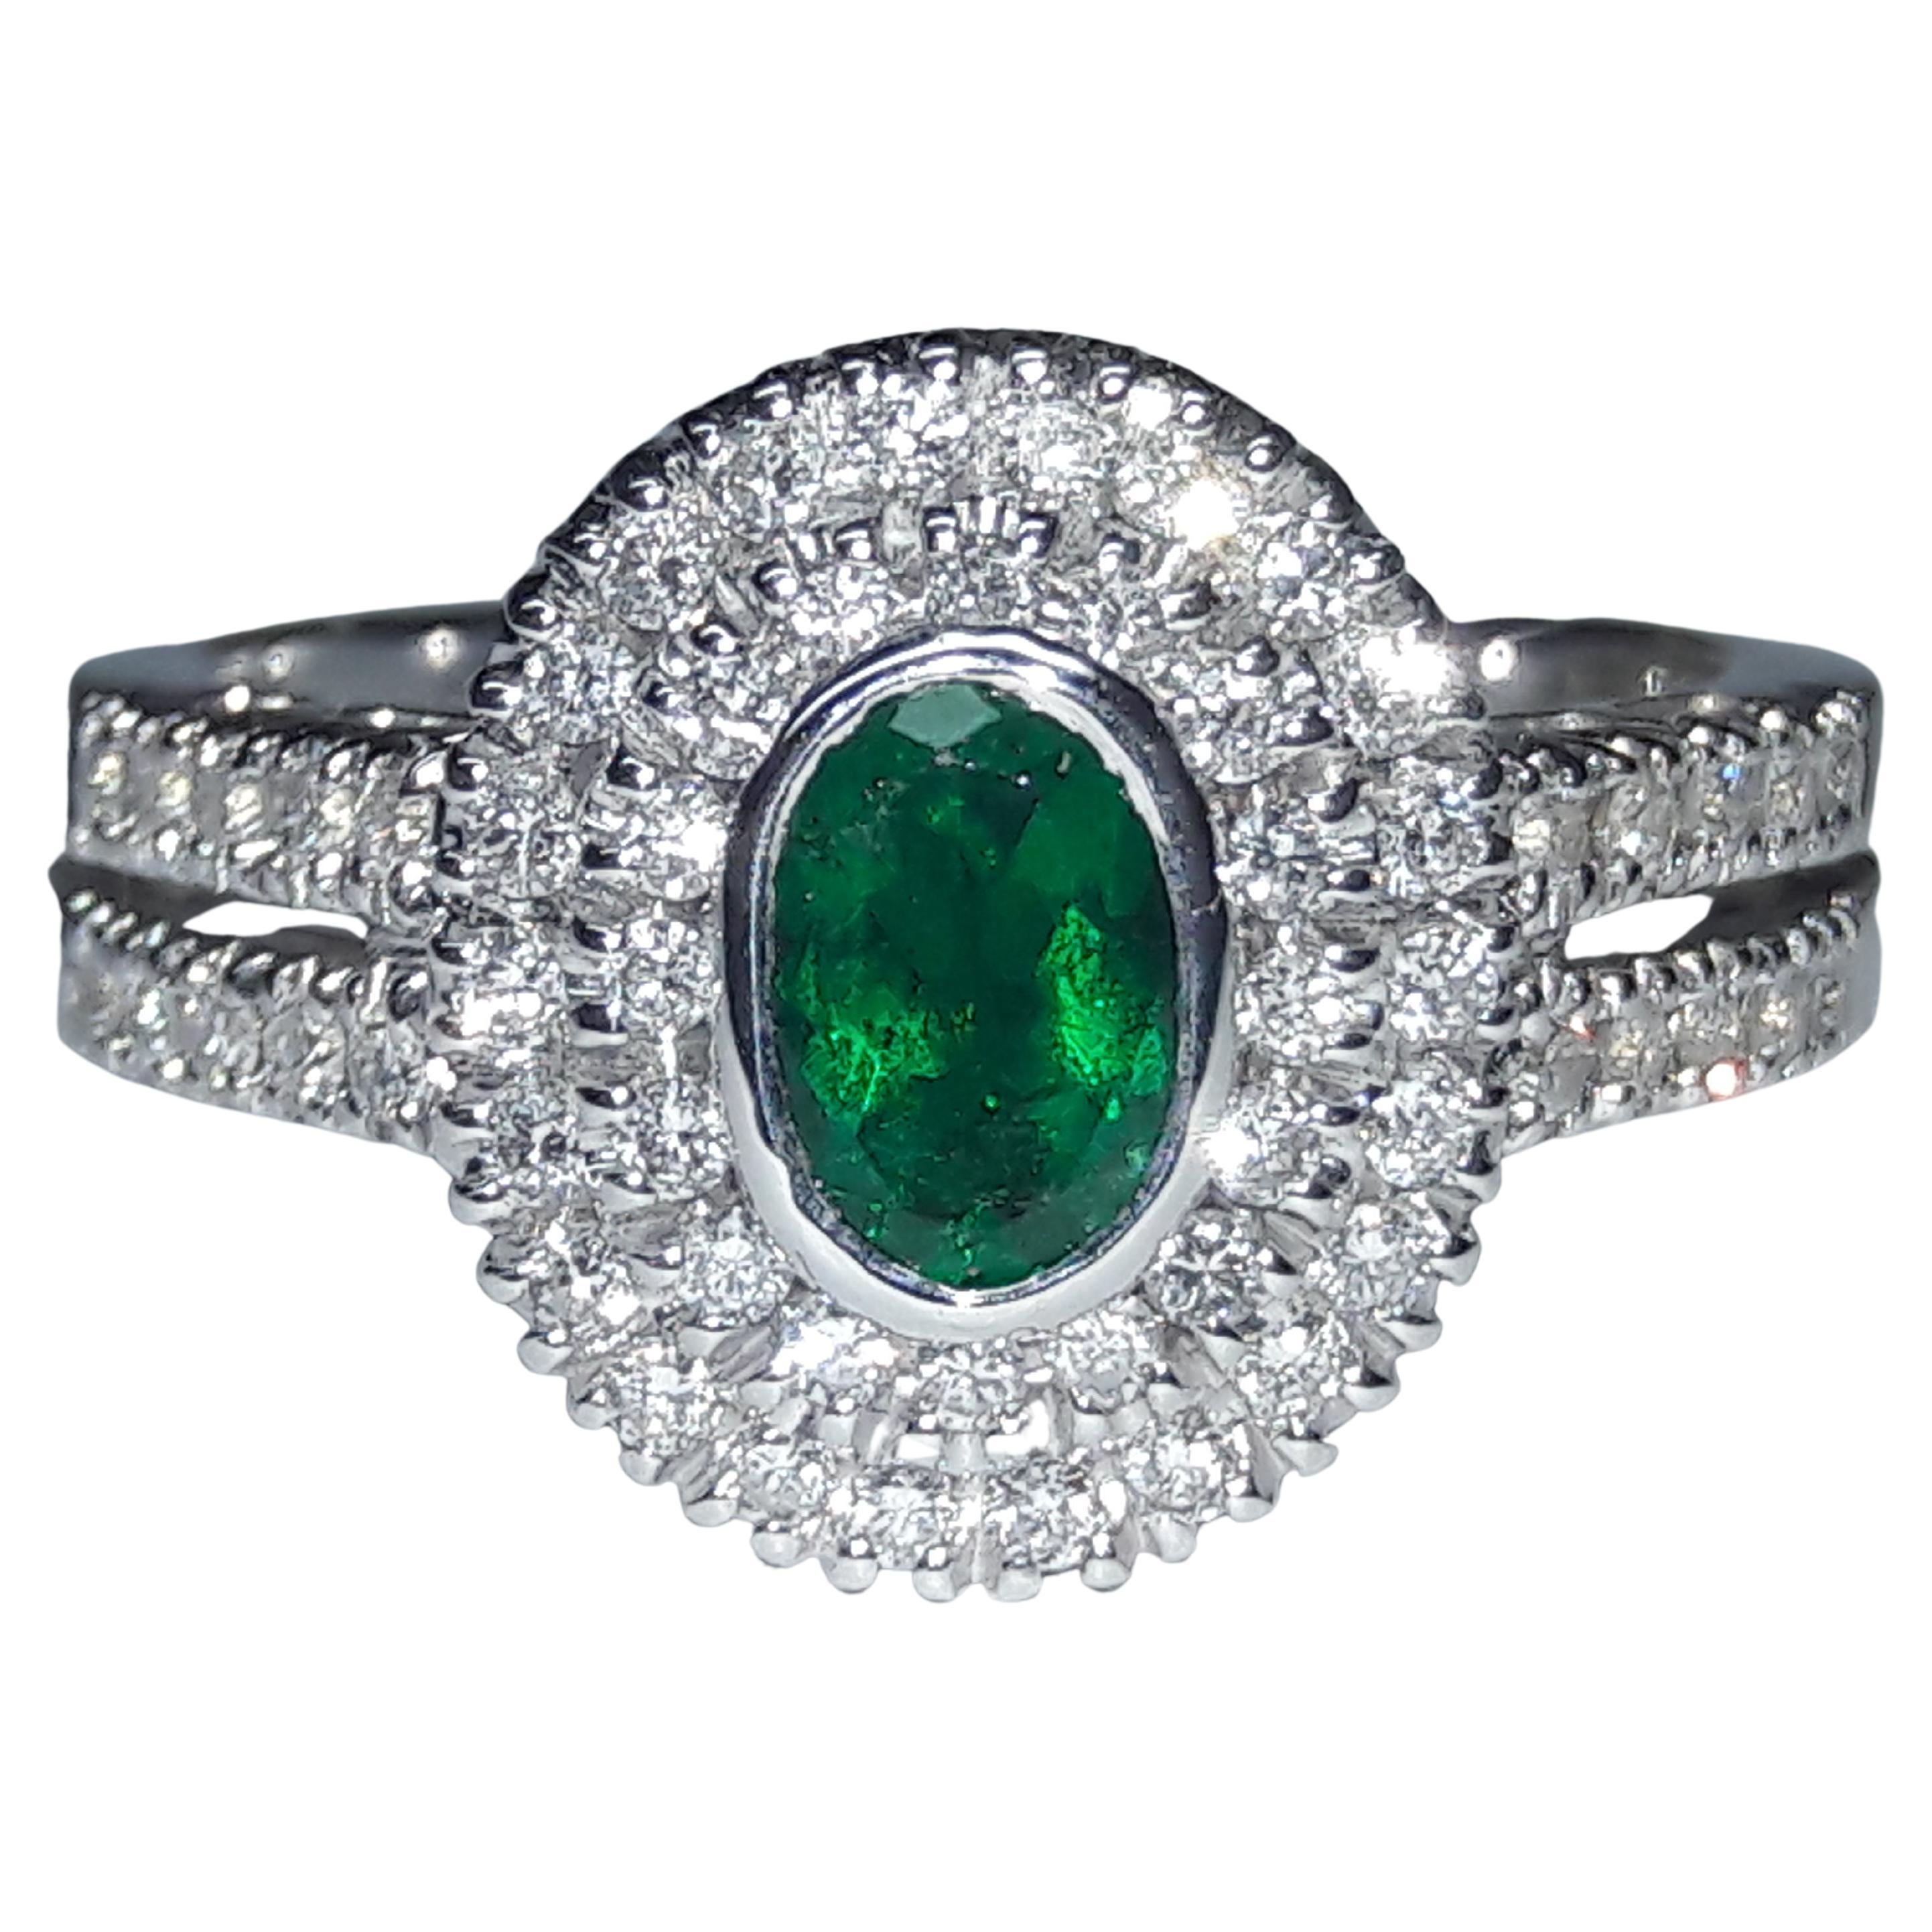 0.44 Carat Natural Oval Emerald 0.48 Carat white Diamonds 18 Karat Gold Ring
This ring was made in Italy and has the hallmark 750 gold which is the equivalent of the US 18k gold.